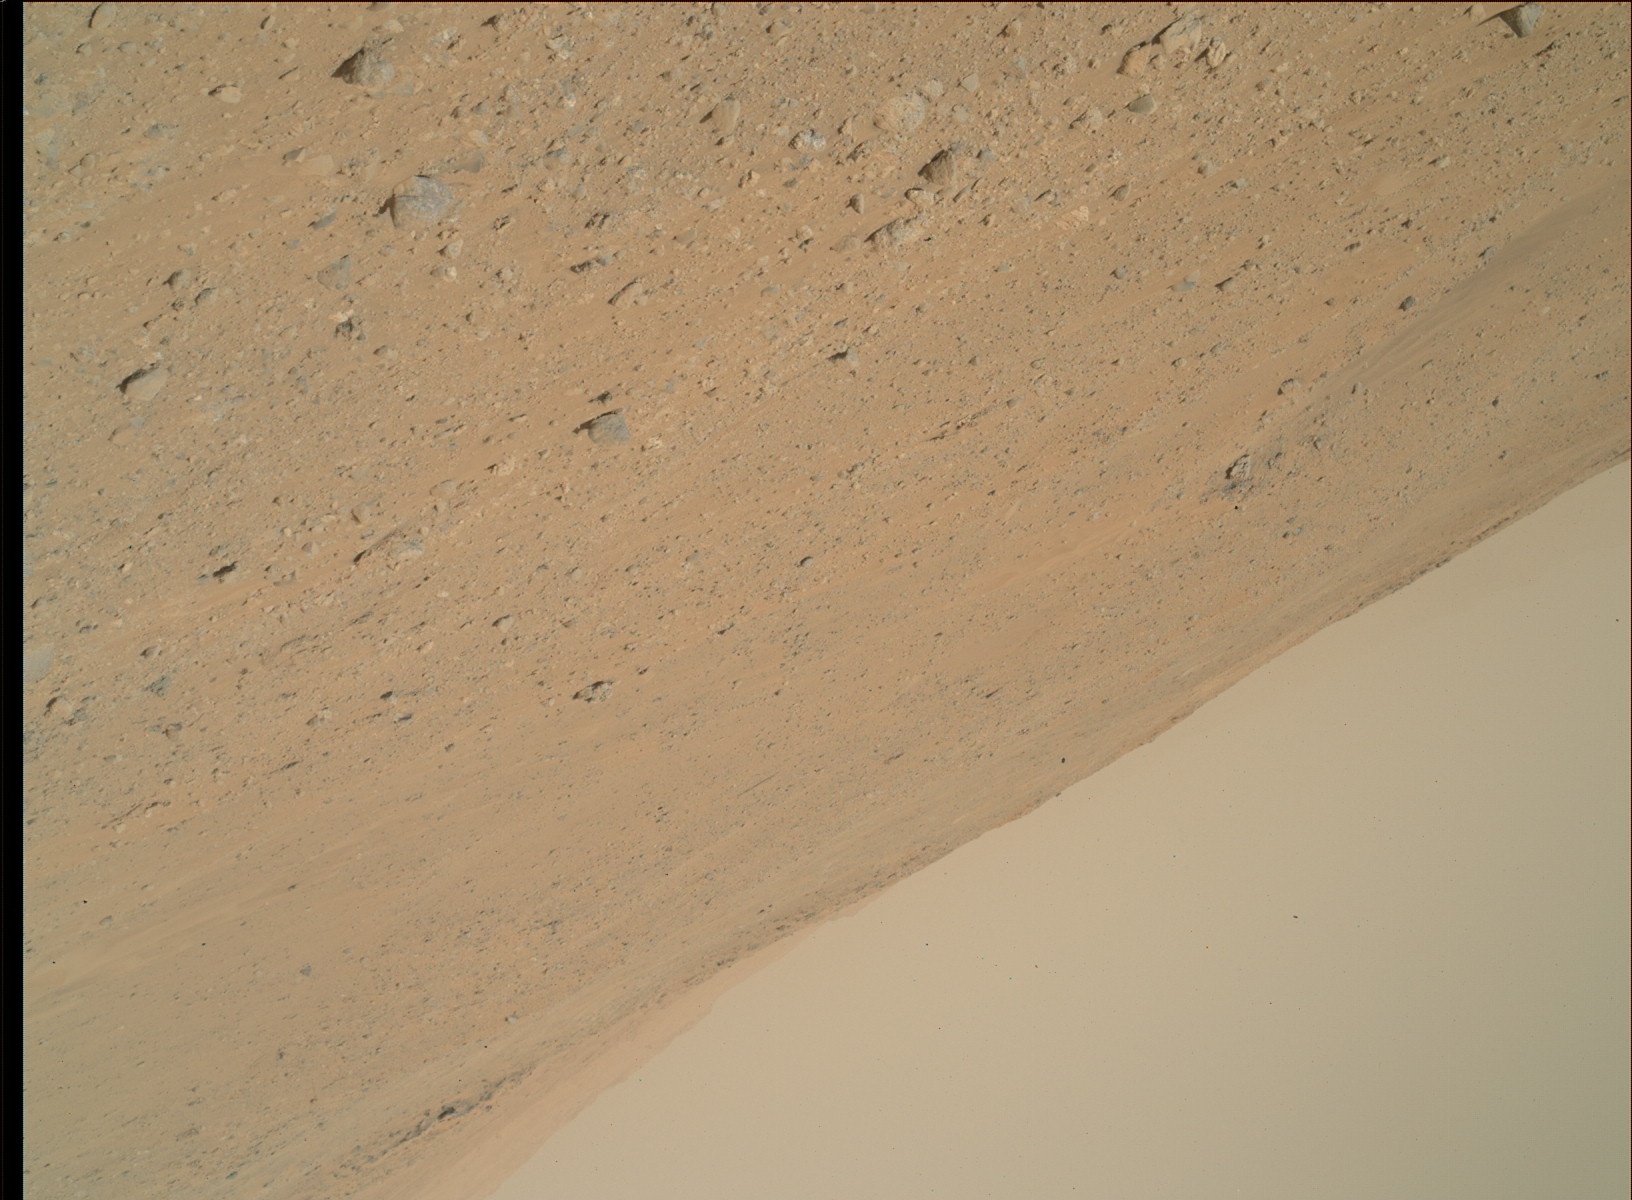 Nasa's Mars rover Curiosity acquired this image using its Mars Hand Lens Imager (MAHLI) on Sol 685